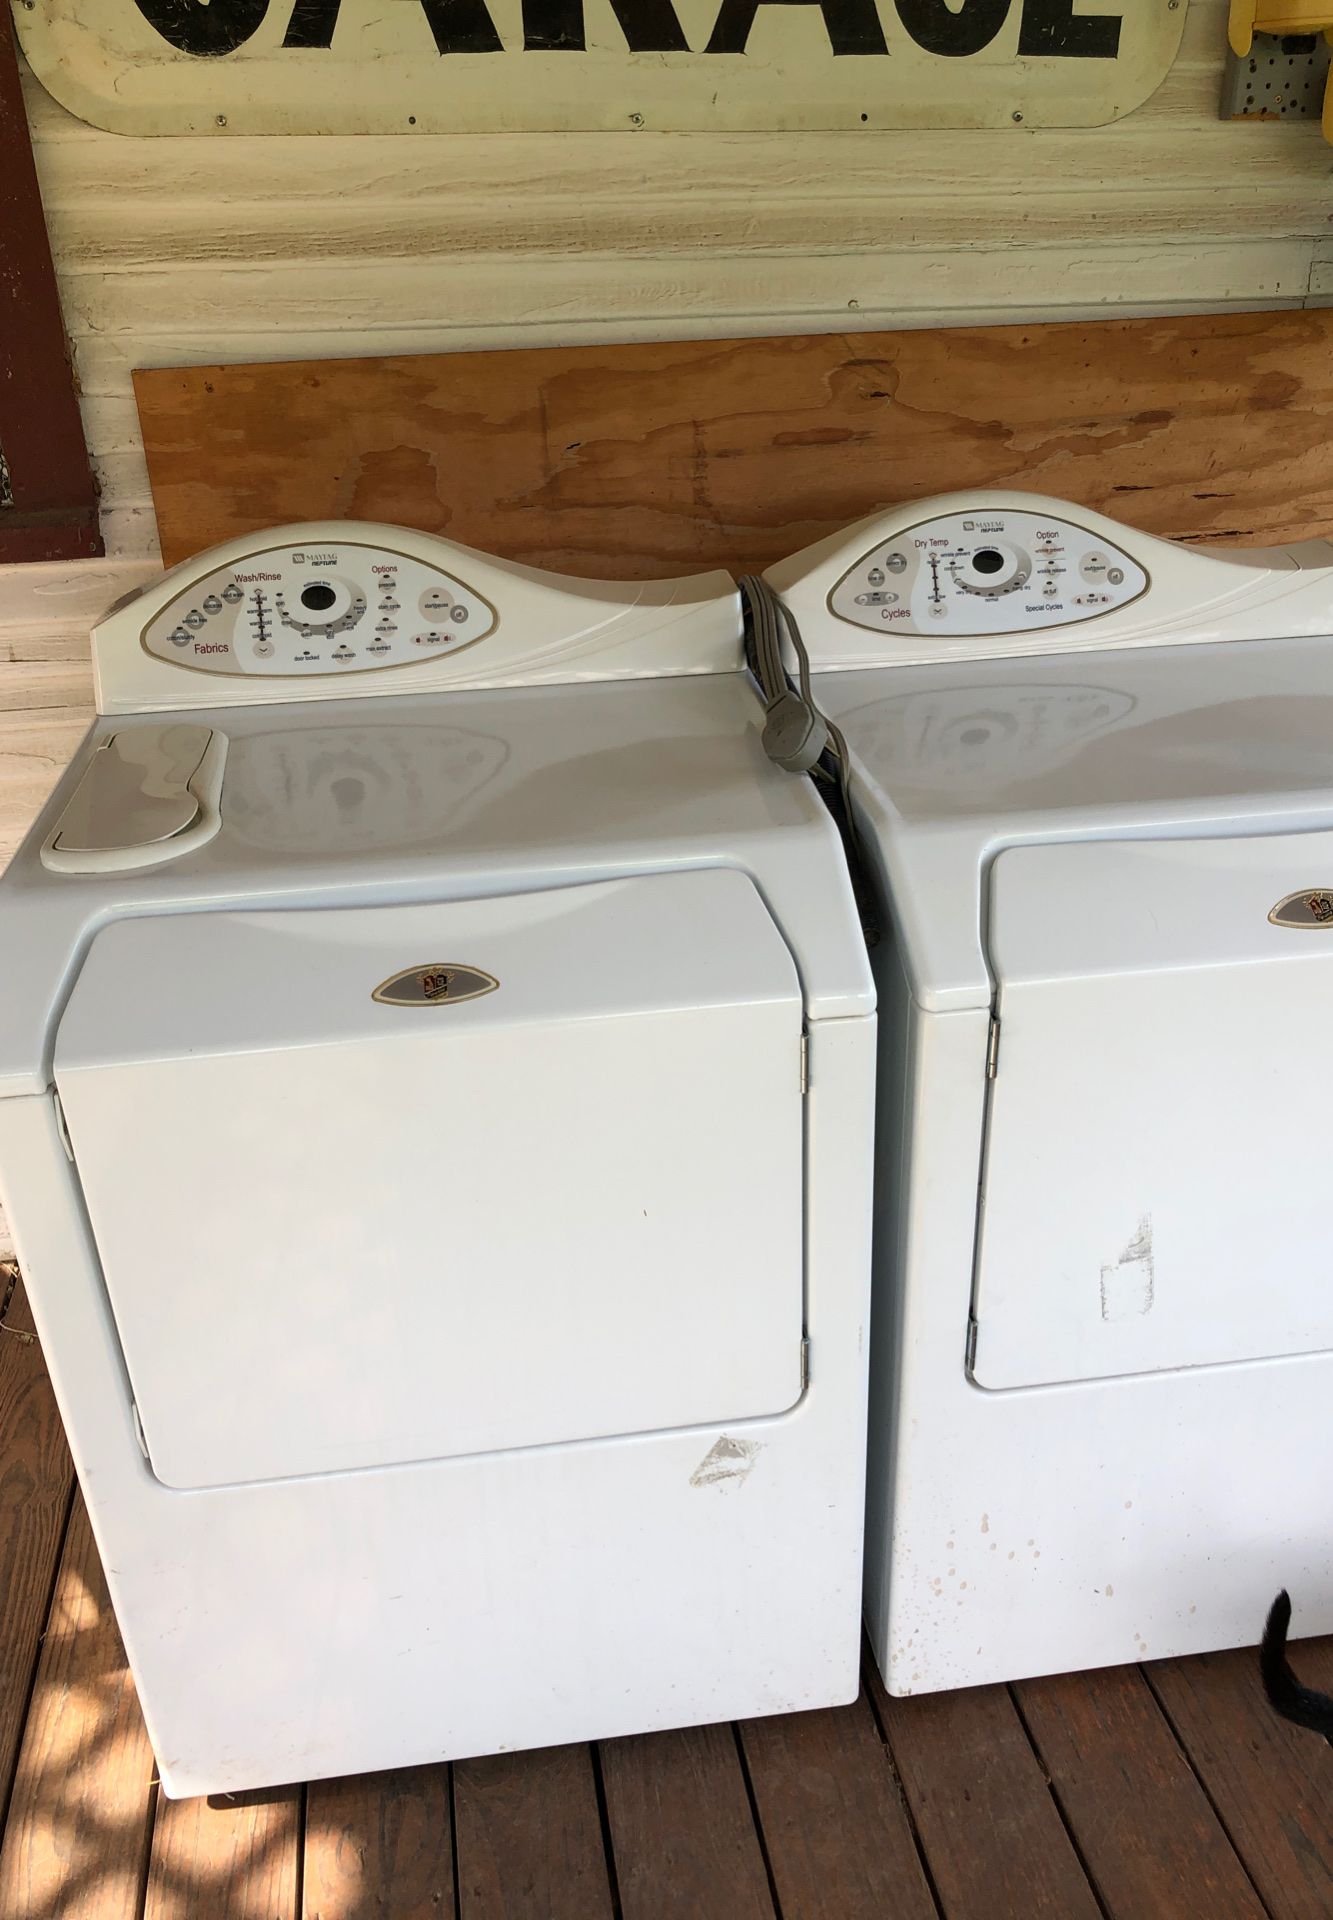 Maytag Neptune washer and dryer set